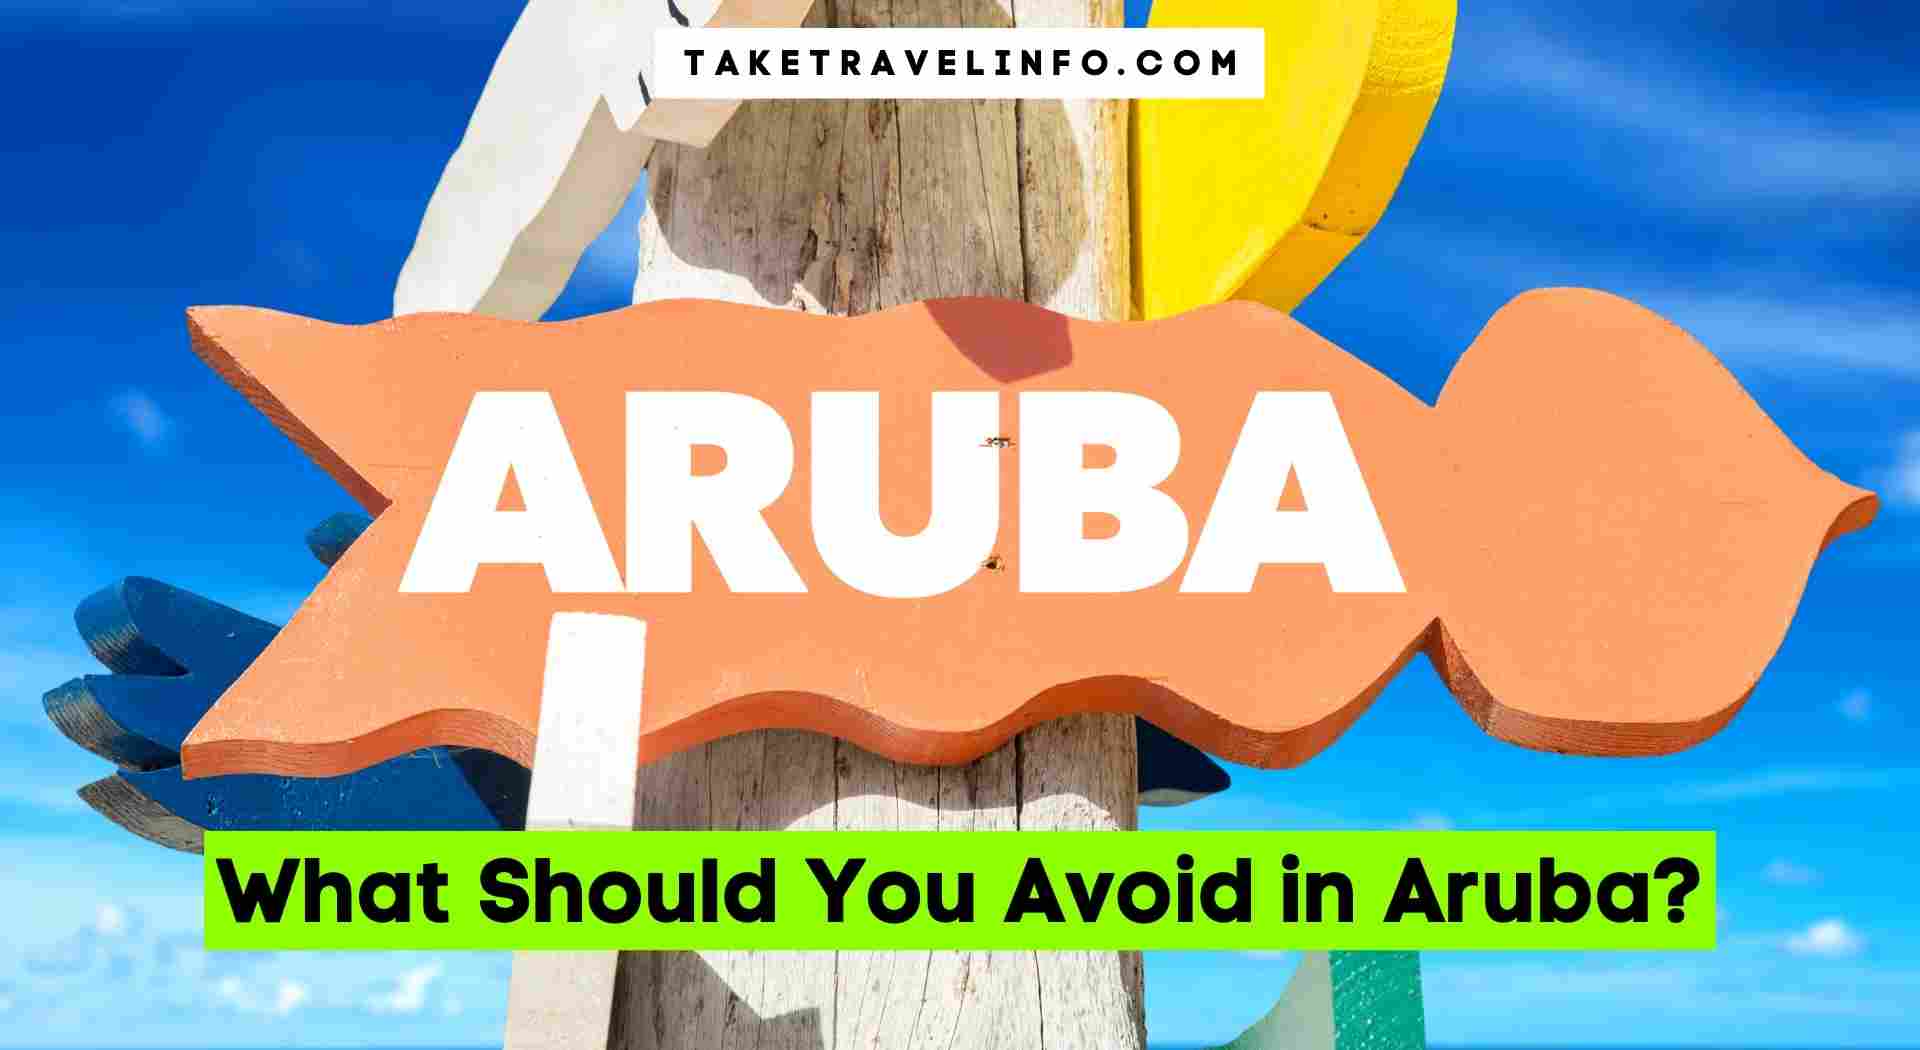 What Should You Avoid in Aruba?